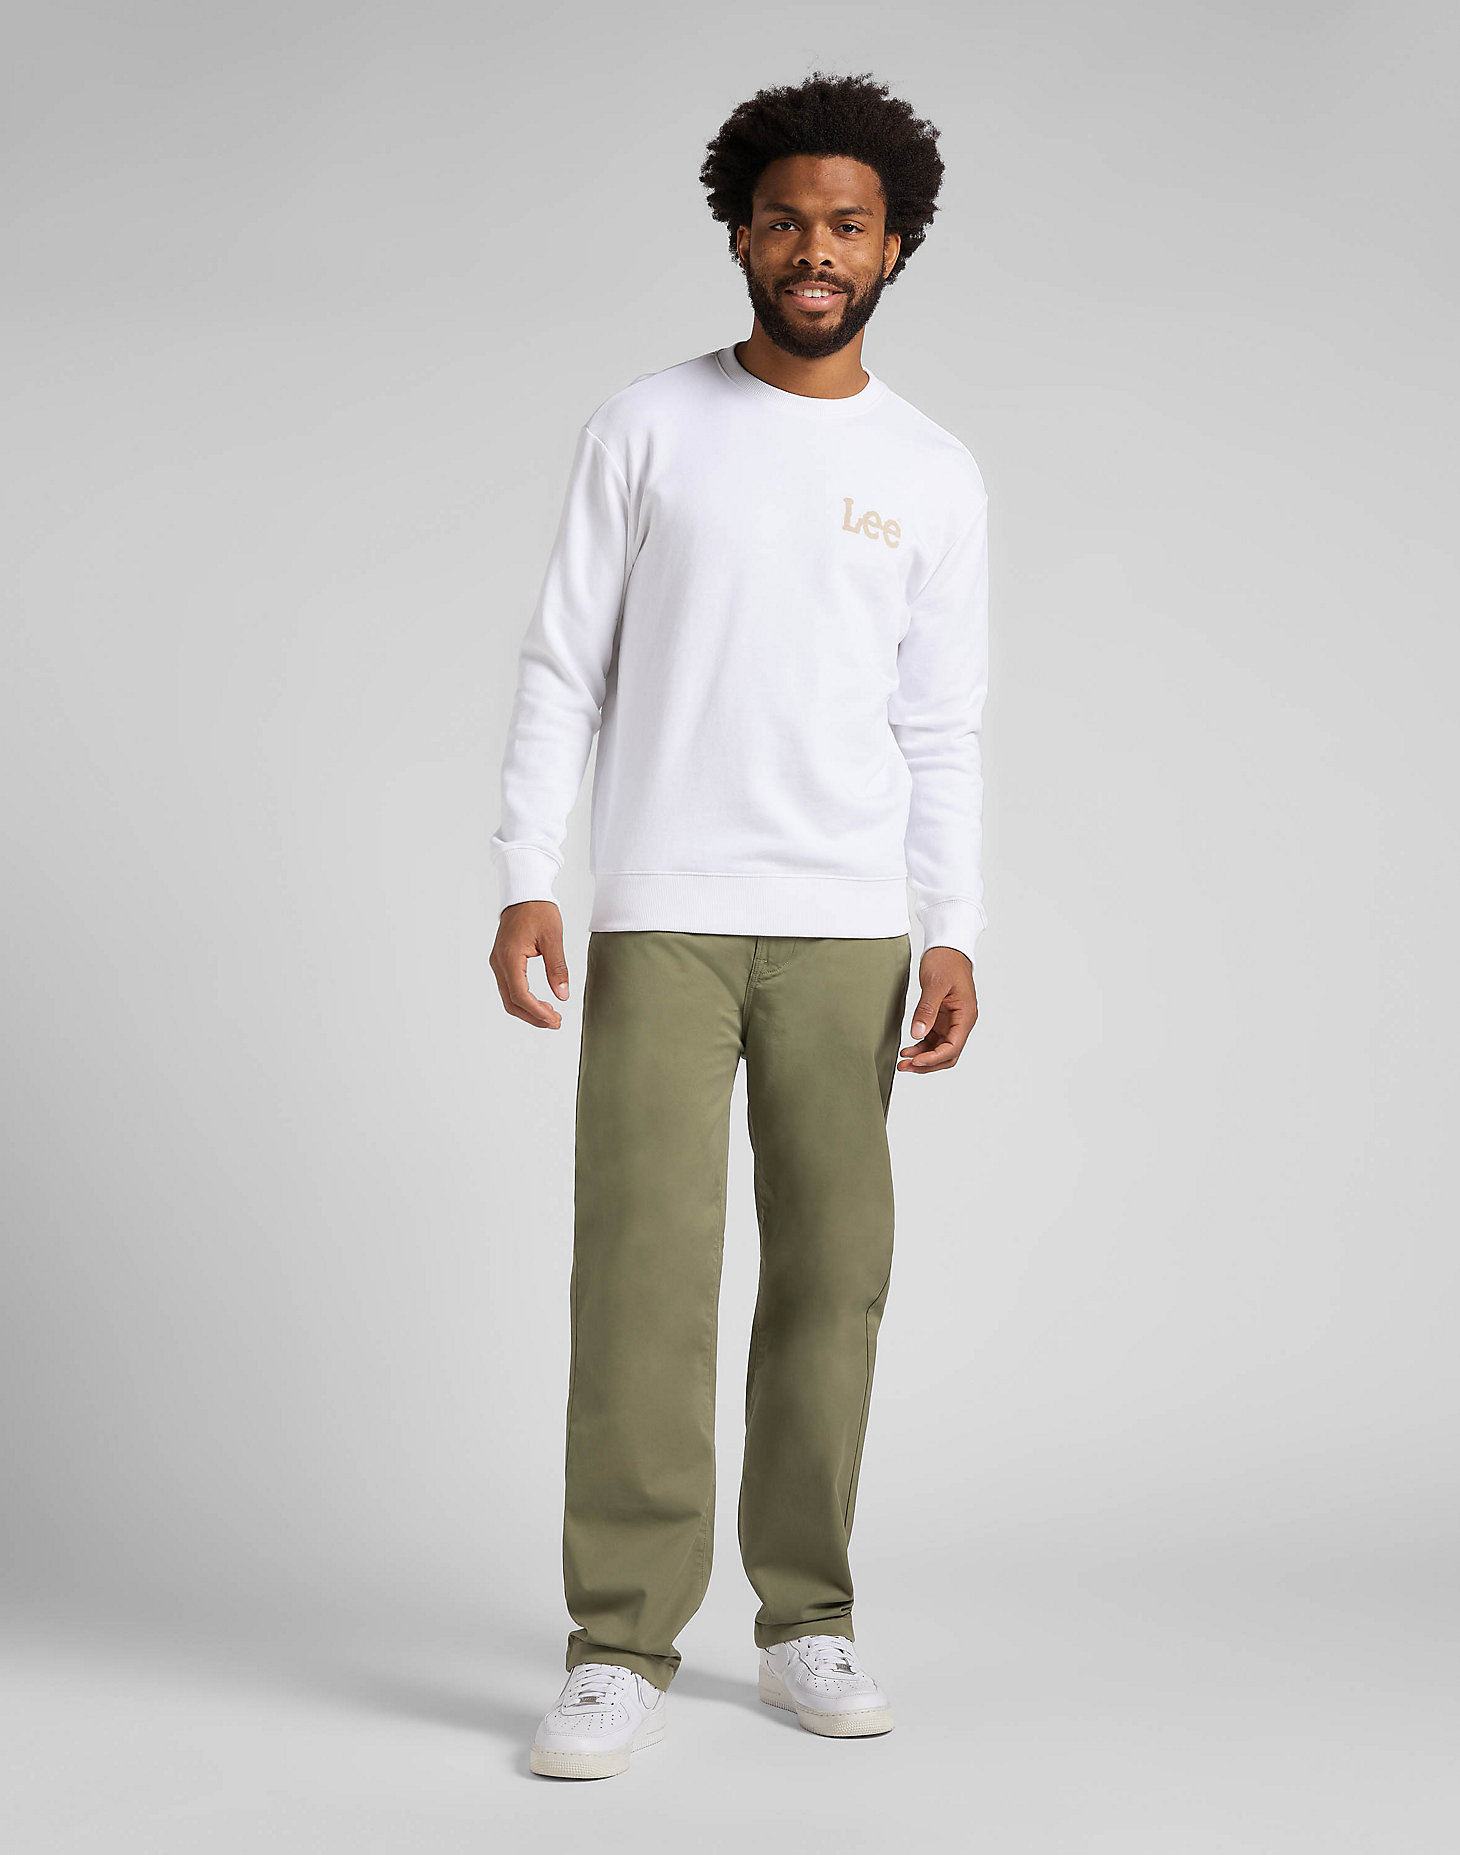 Relaxed Chino in Olive Green main view